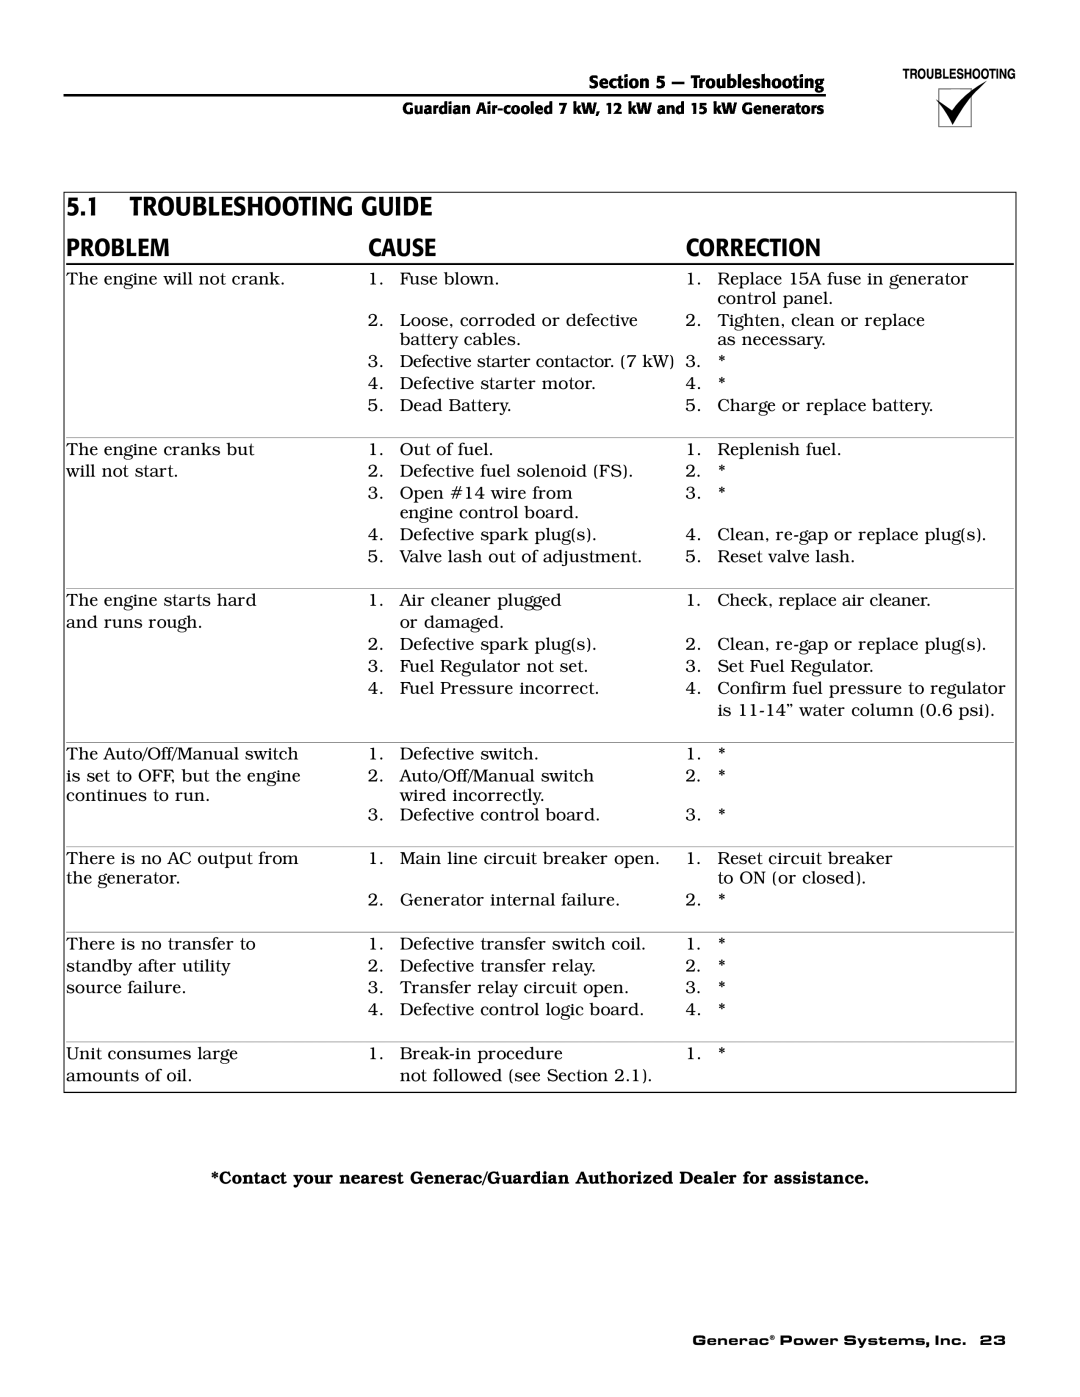 Generac 04389-1, 04456-1, 04390-1 owner manual 5.1TROUBLESHOOTING GUIDE, Problem, Cause, Correction 